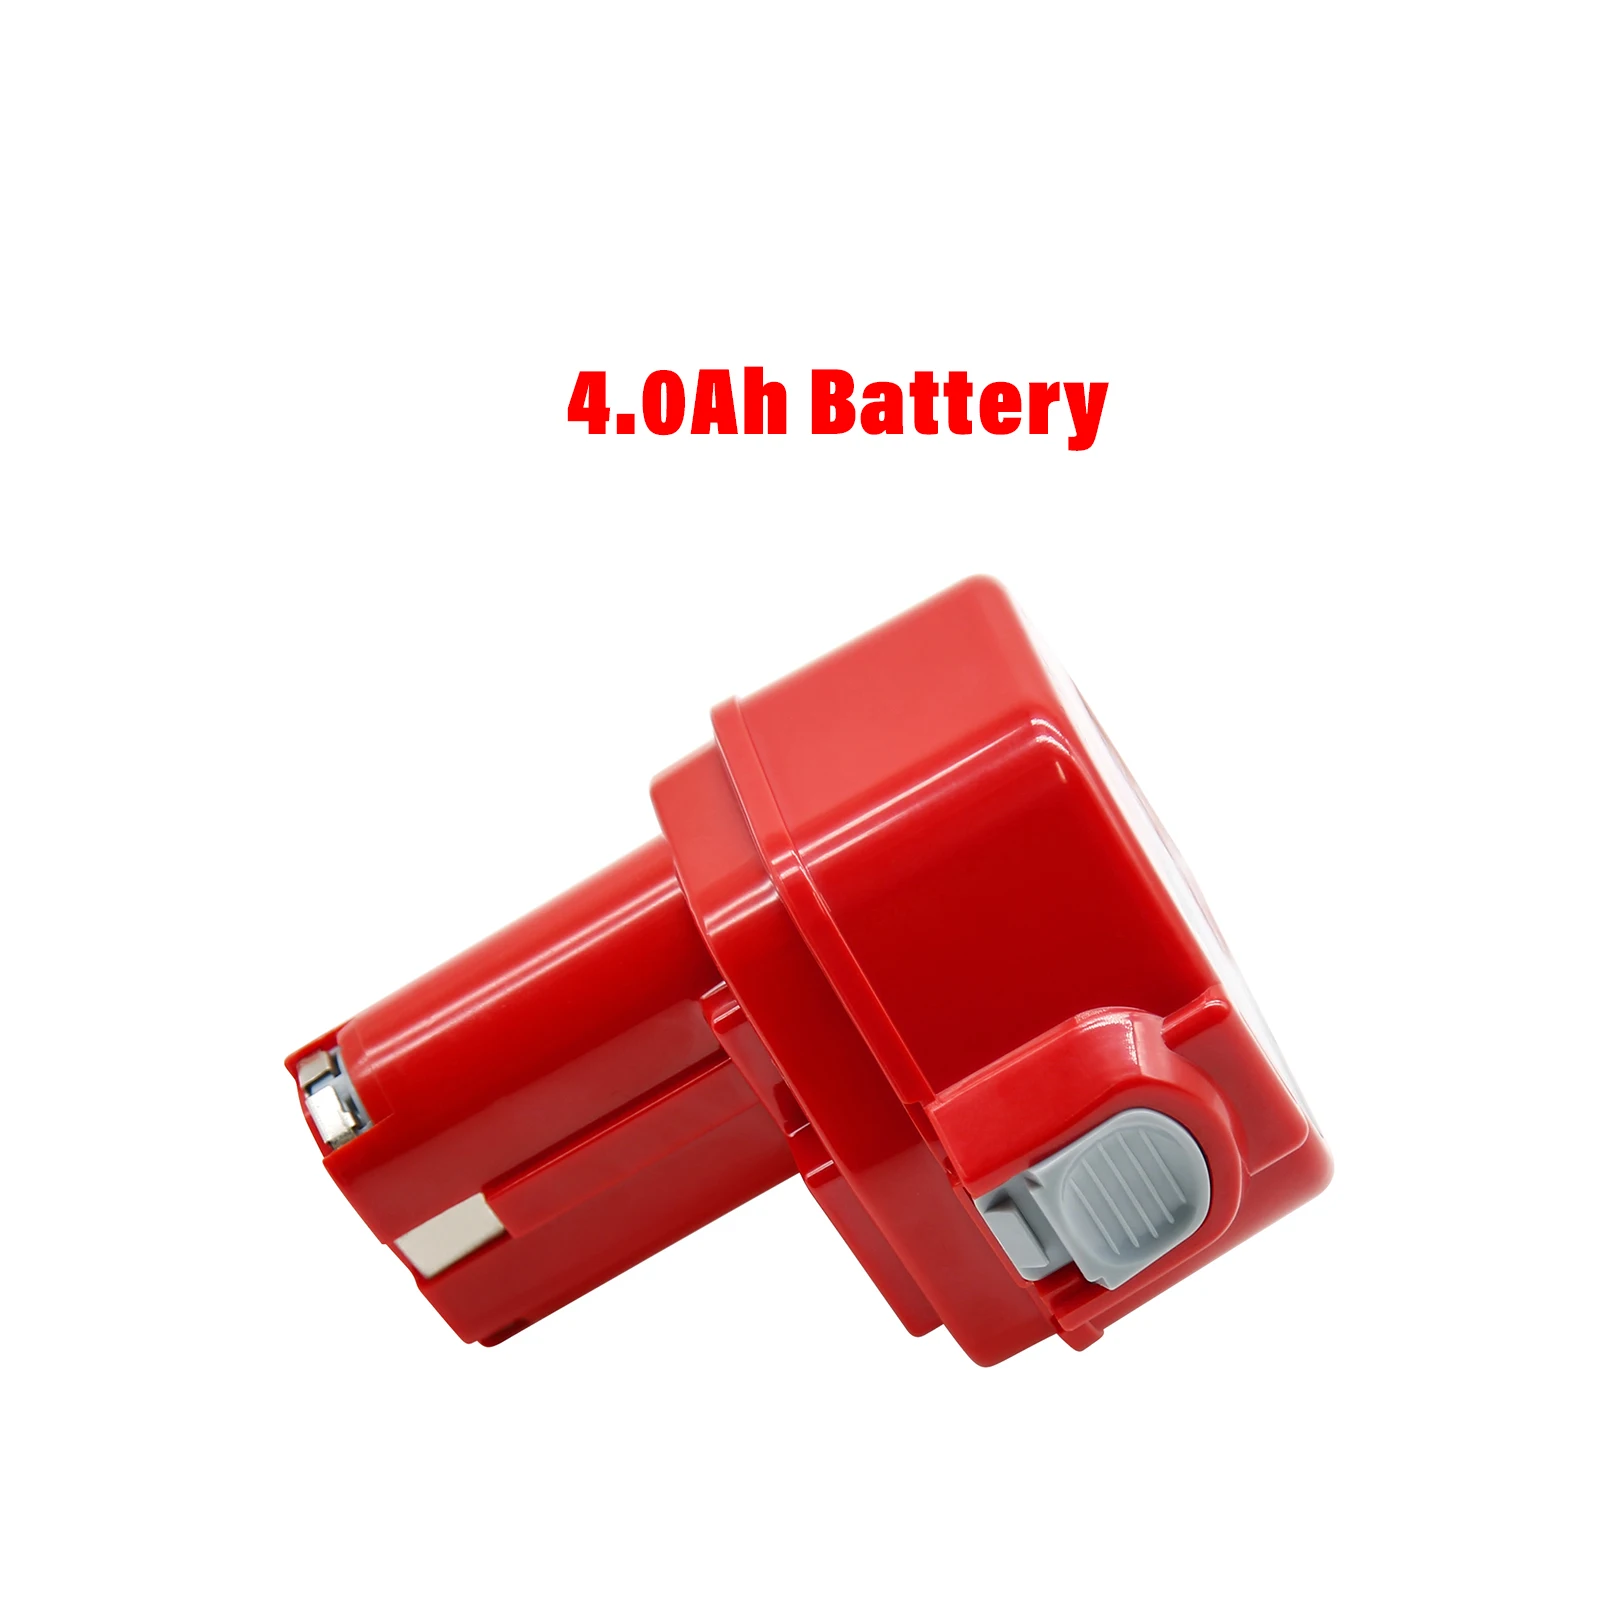 for Makita 12V 3000 mAh rechargeable battery for power tools for Mak drill  PA12 1050, 1220, 1234, 4000 5000, 6200, 6300 Ser - AliExpress